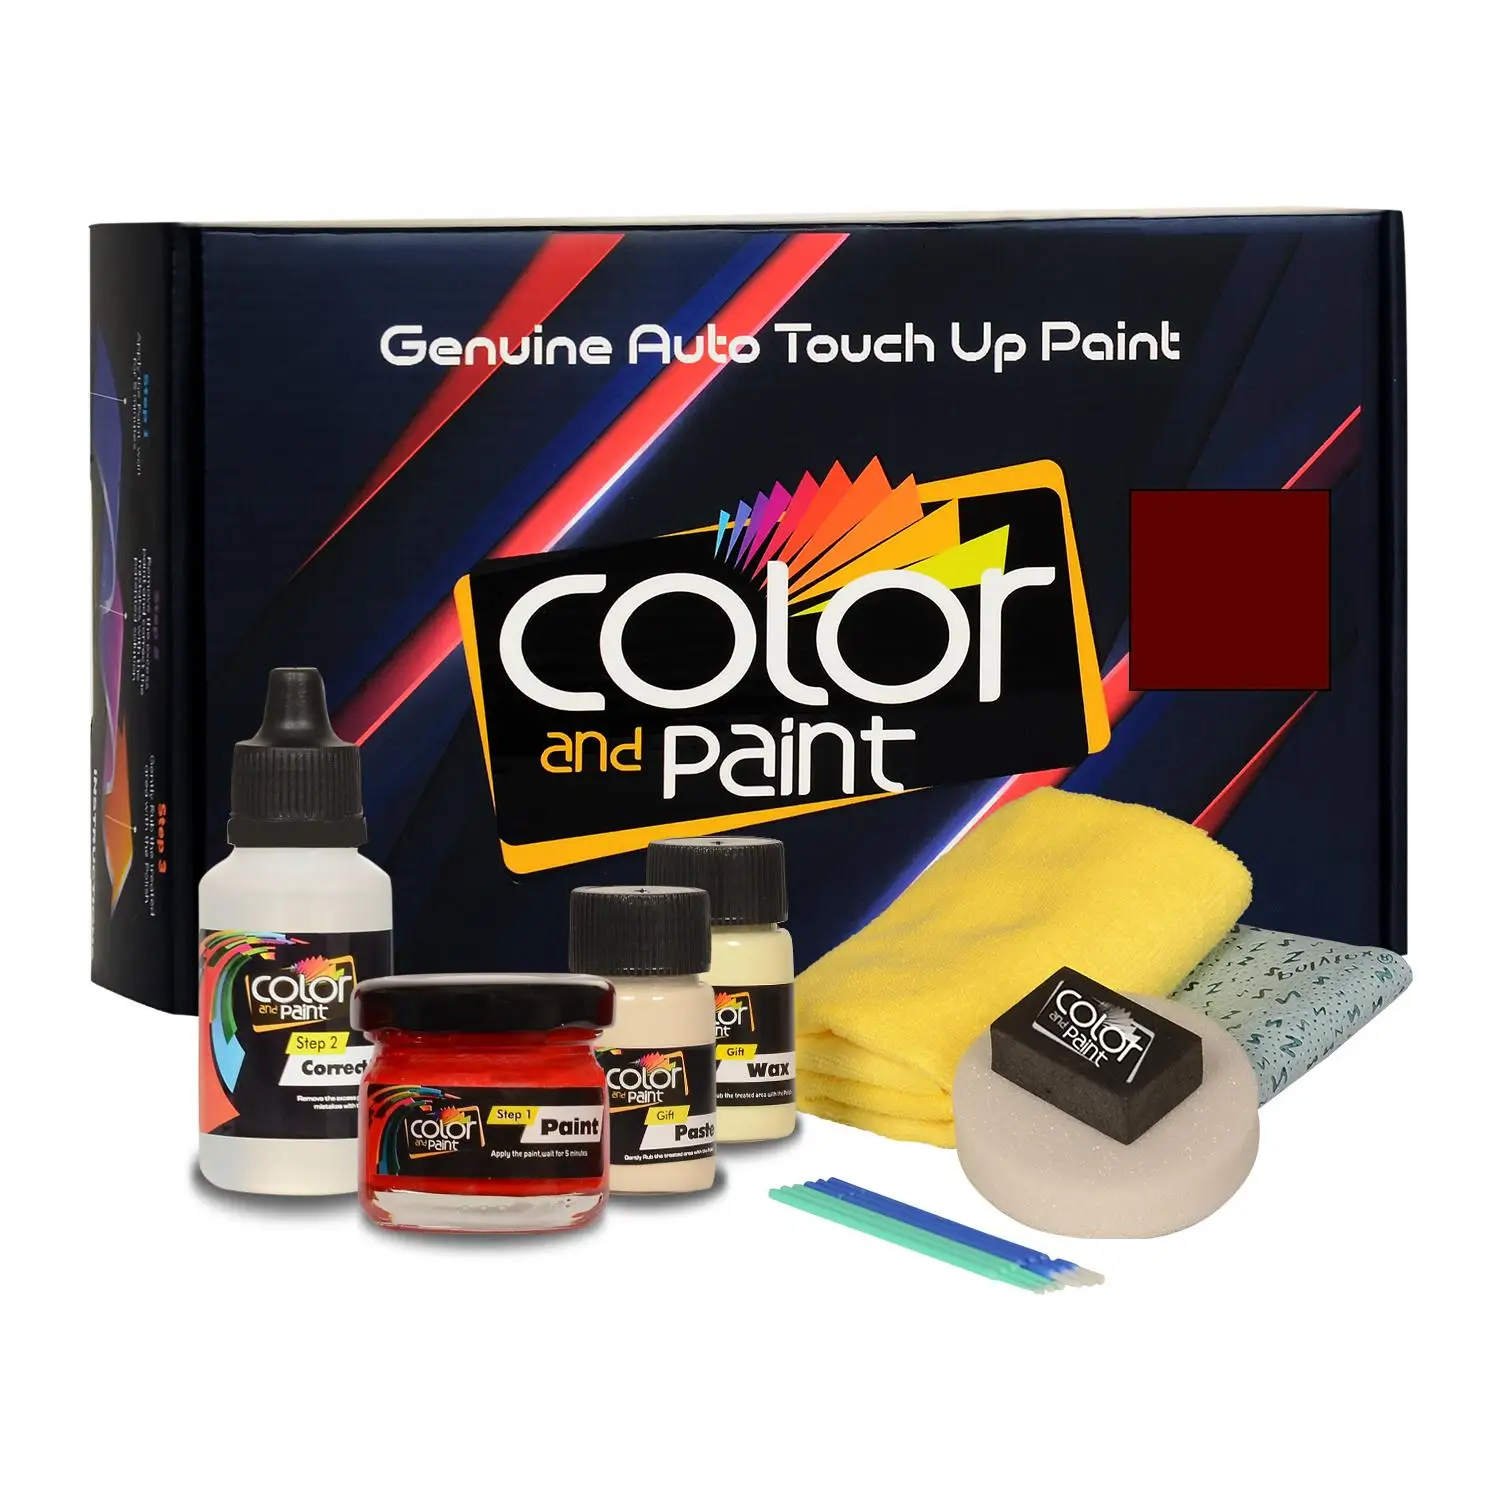 

Color and Paint compatible with Peugeot Automotive Touch Up Paint - ROUGE VALLELUNGA - 1607 - Basic Care